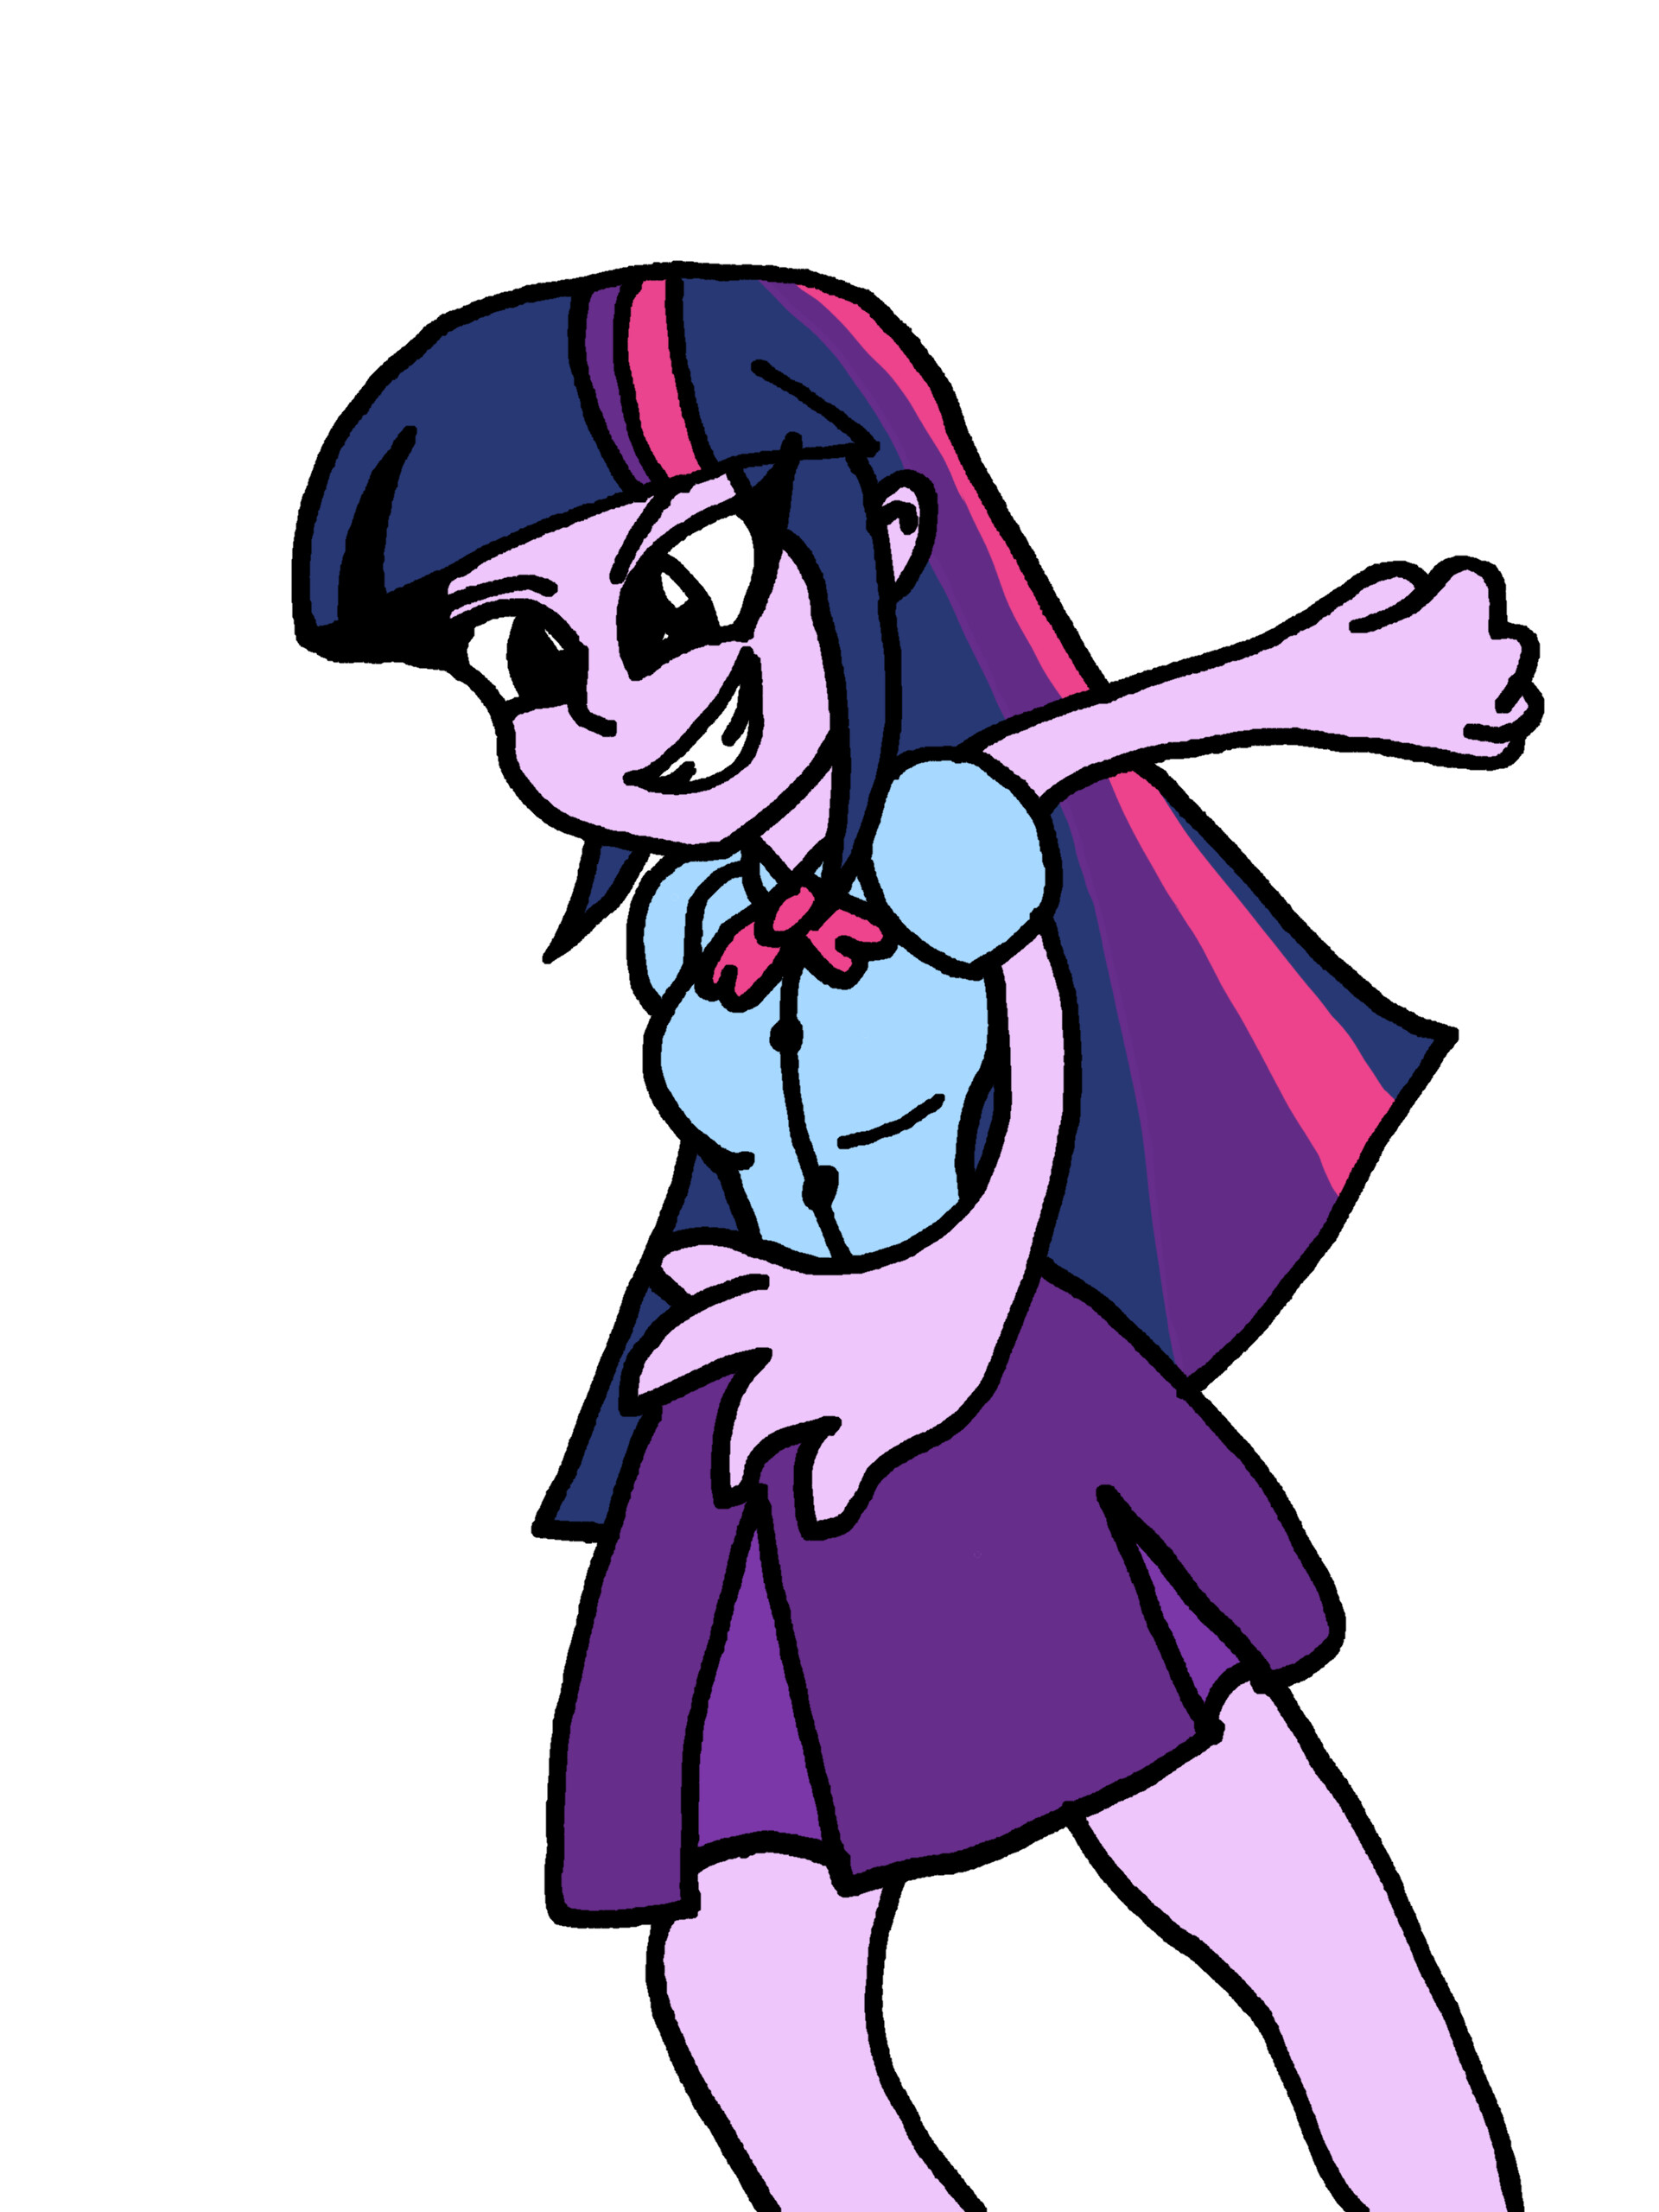 ArtStation - 【MY LITTLE PONY】Just want to draw a Twilight Sparkle